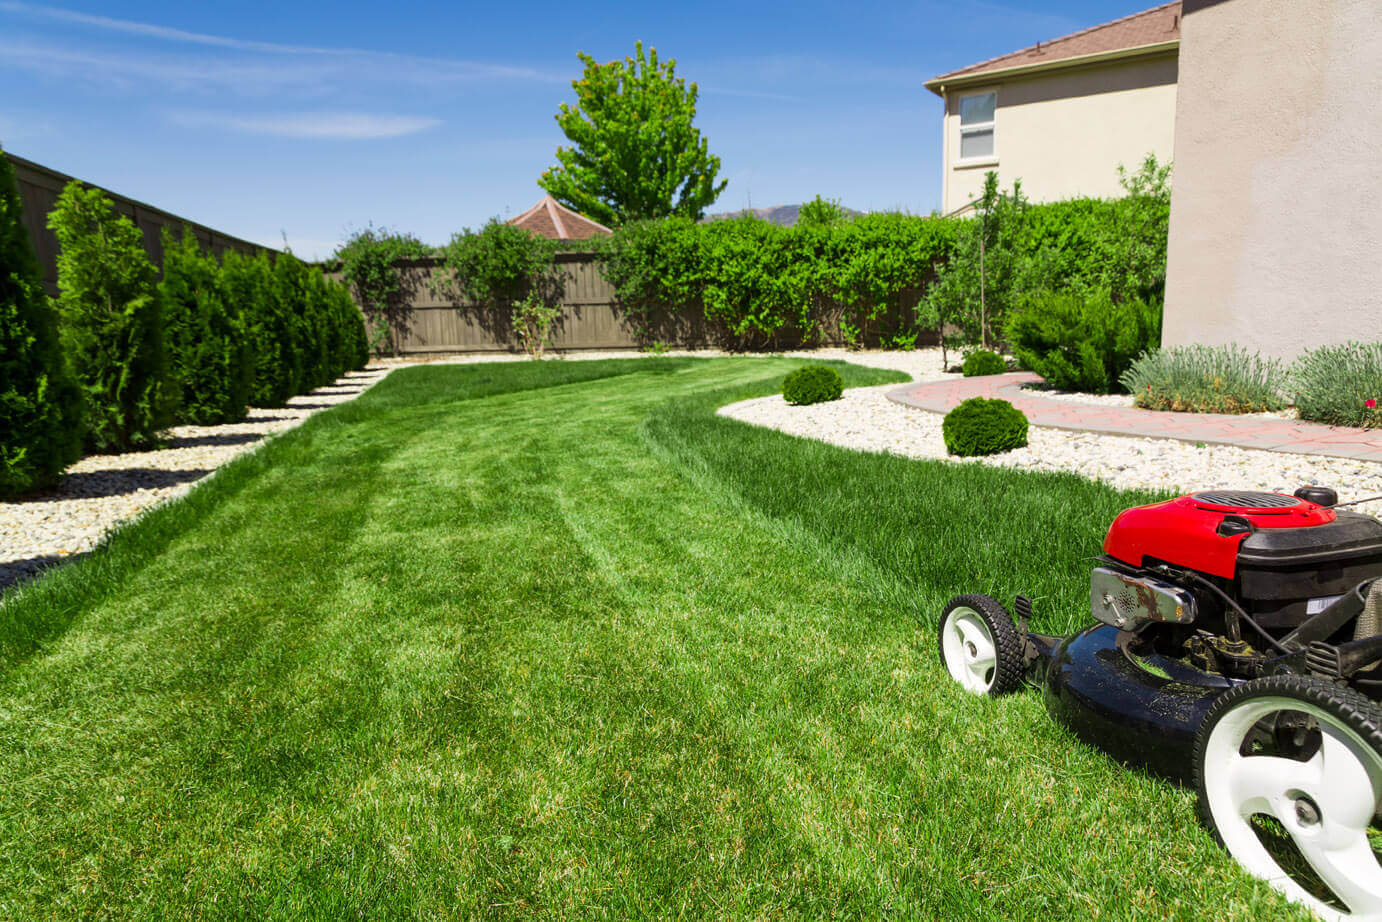 Grounds Maintenance - Lawn Mowing